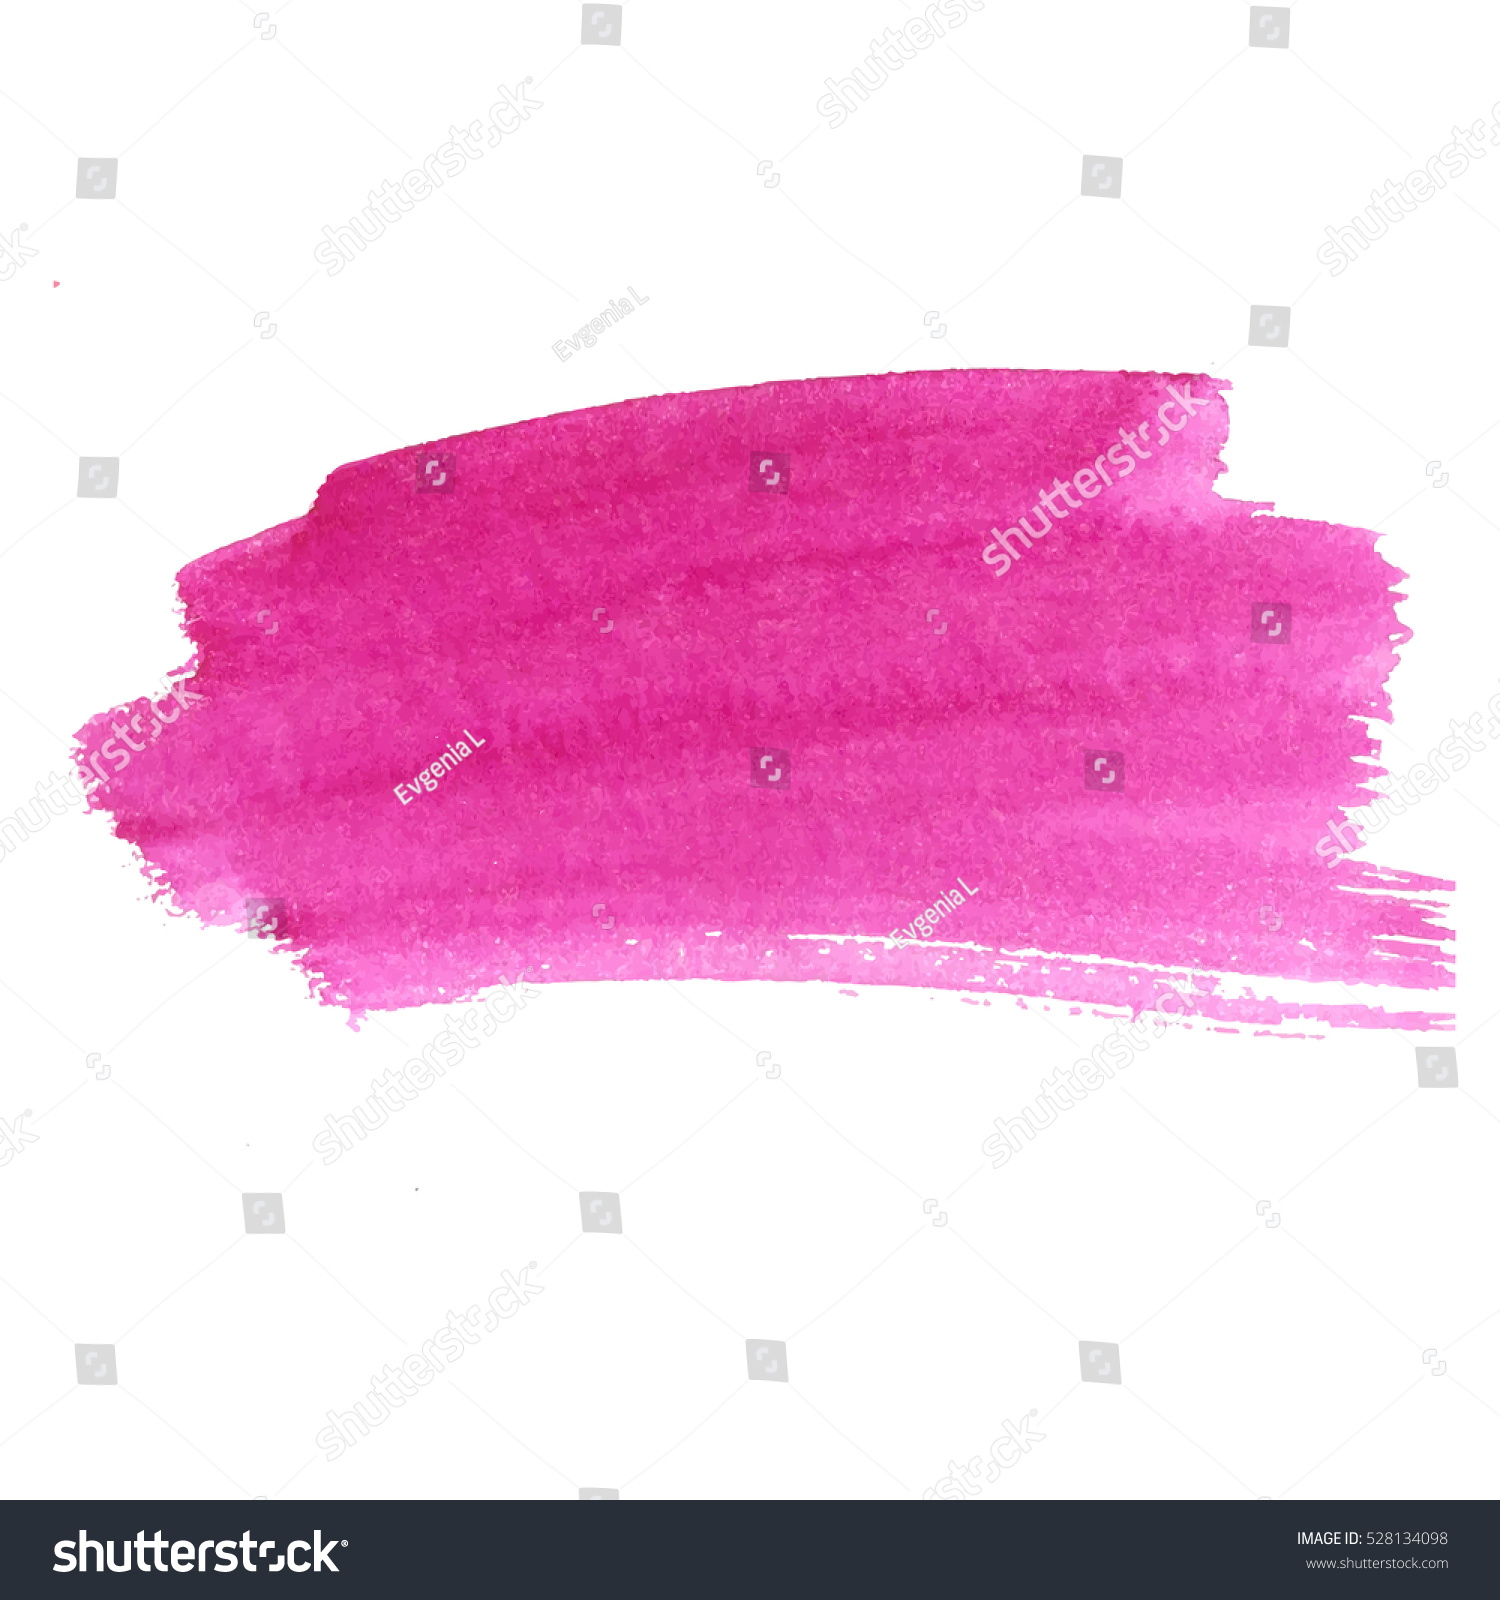 Abstract Watercolor Brush Strokes Painted Background Stock Vector ...